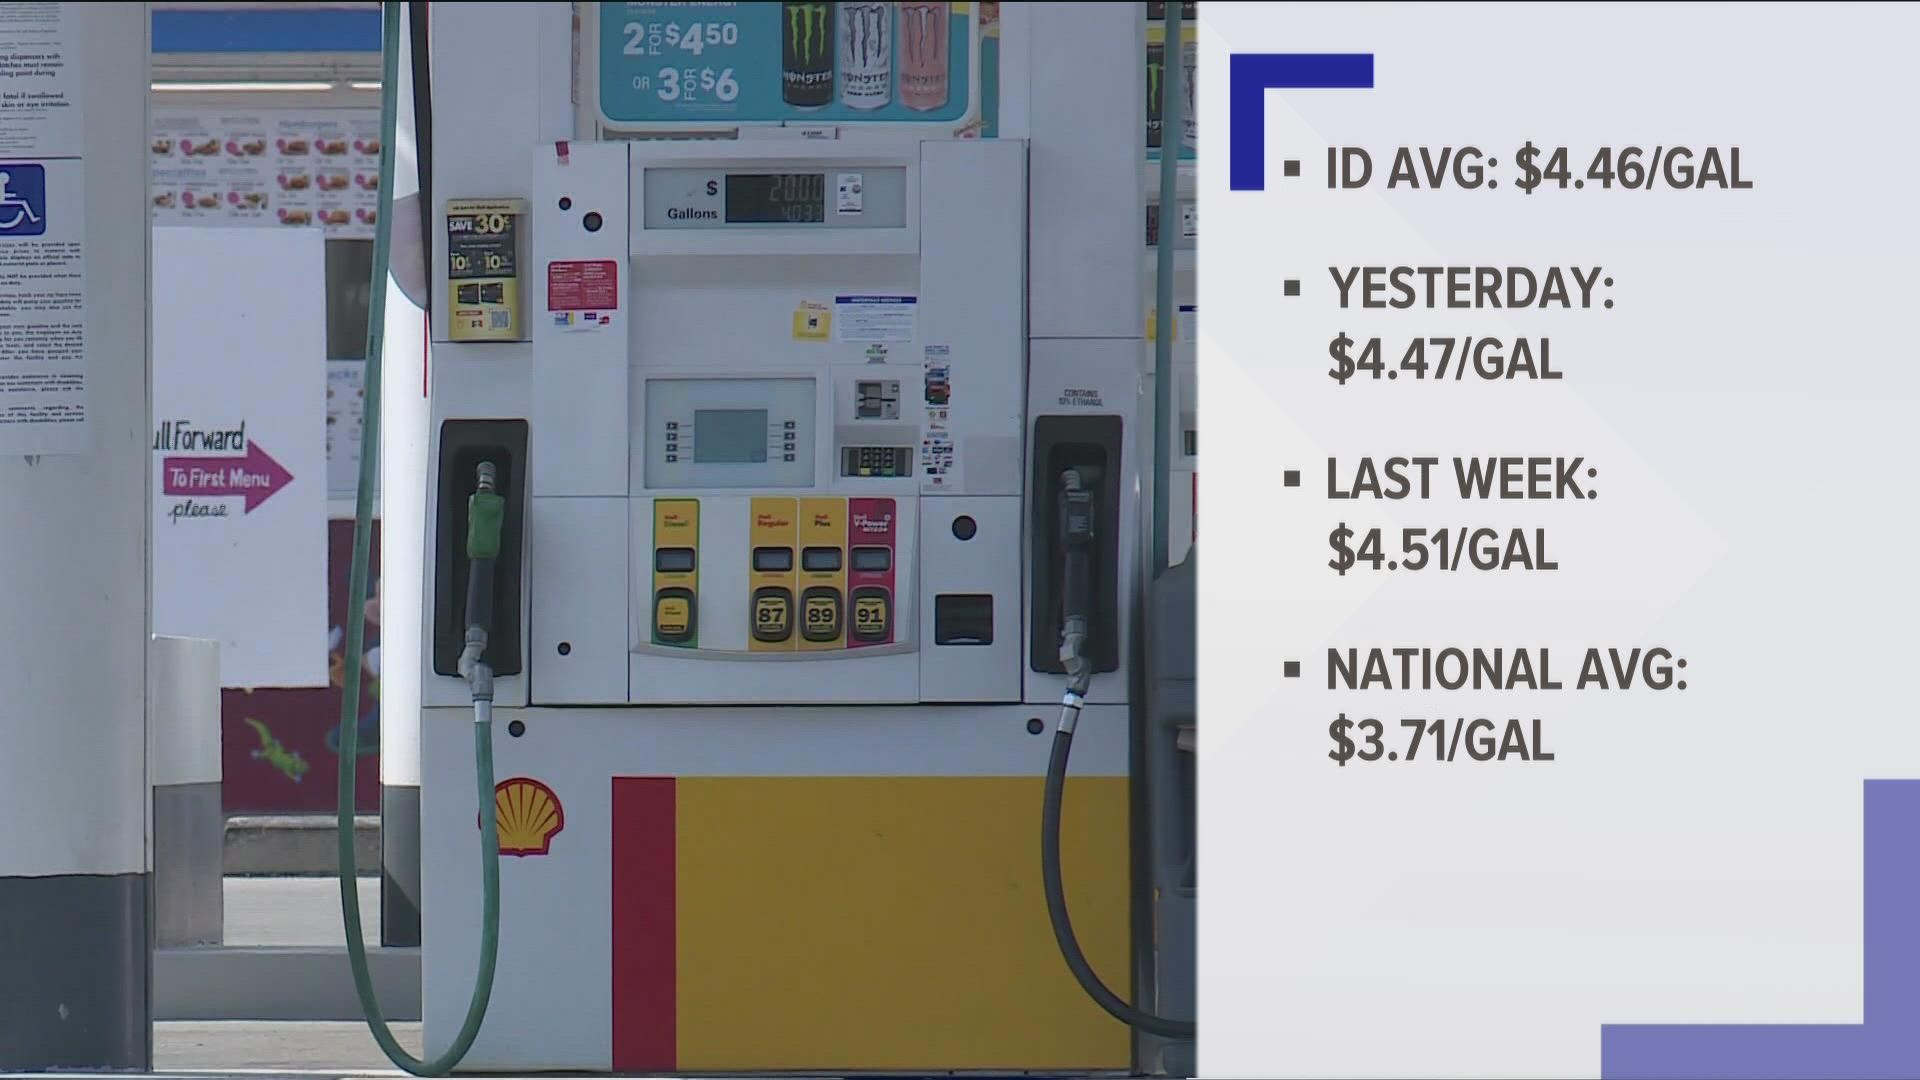 Gas prices across Idaho are averaging $4.44 per gallon and national diesel prices are $5.01 per gallon, according to GasBuddy.